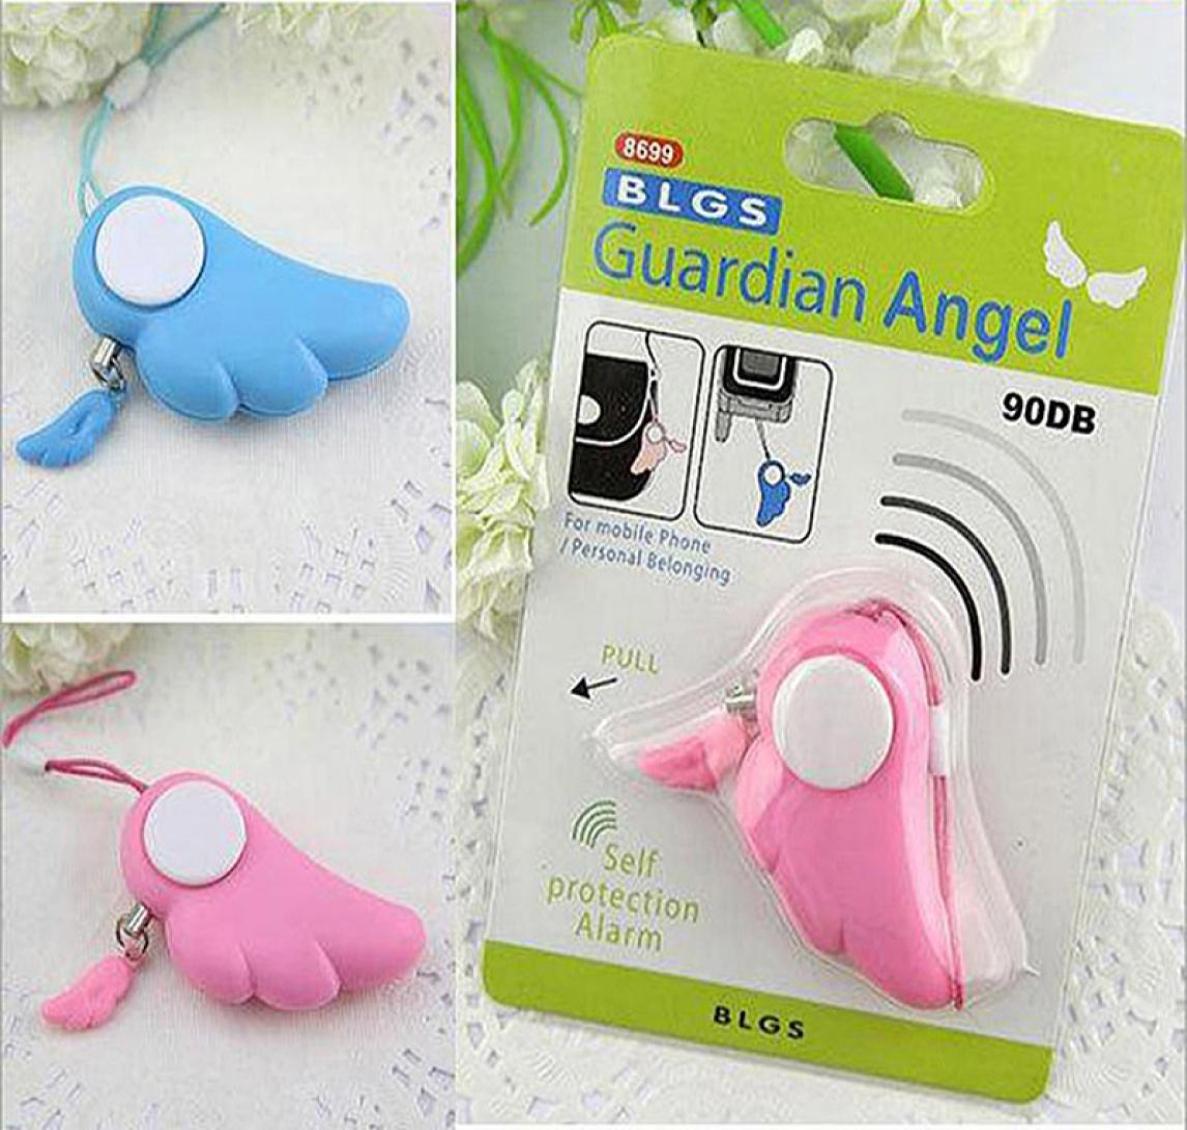 

Wings Lady Defensive Electronic Alarm Safe Stable Mini Portable Keychain Alarm Safe Panic Anti Attack Self Defence 8946884